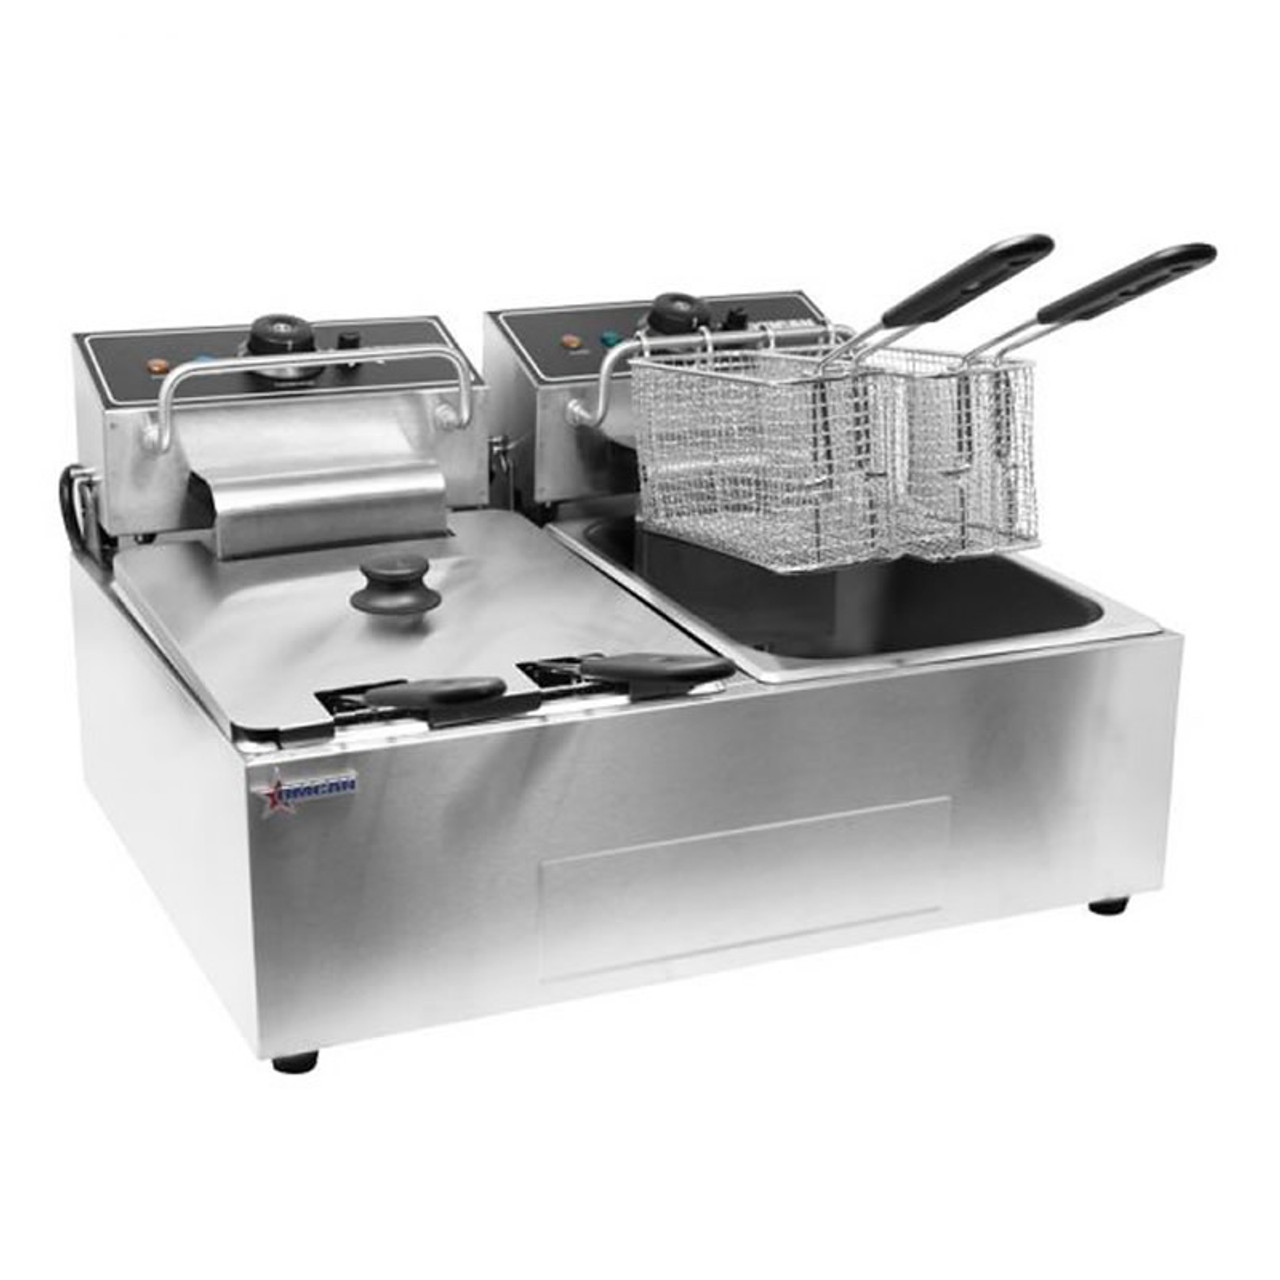 https://cdn11.bigcommerce.com/s-3n1nnt5qyw/images/stencil/1280x1280/products/11327/12526/omcan-fma-fryer-electric-countertop-21-1-2-w-twin-fry-pot-2-6-l-oil-volume-thermostat-stainless-steel-construction-3-2-kwce-model-34868-15__99833.1657827062.jpg?c=1